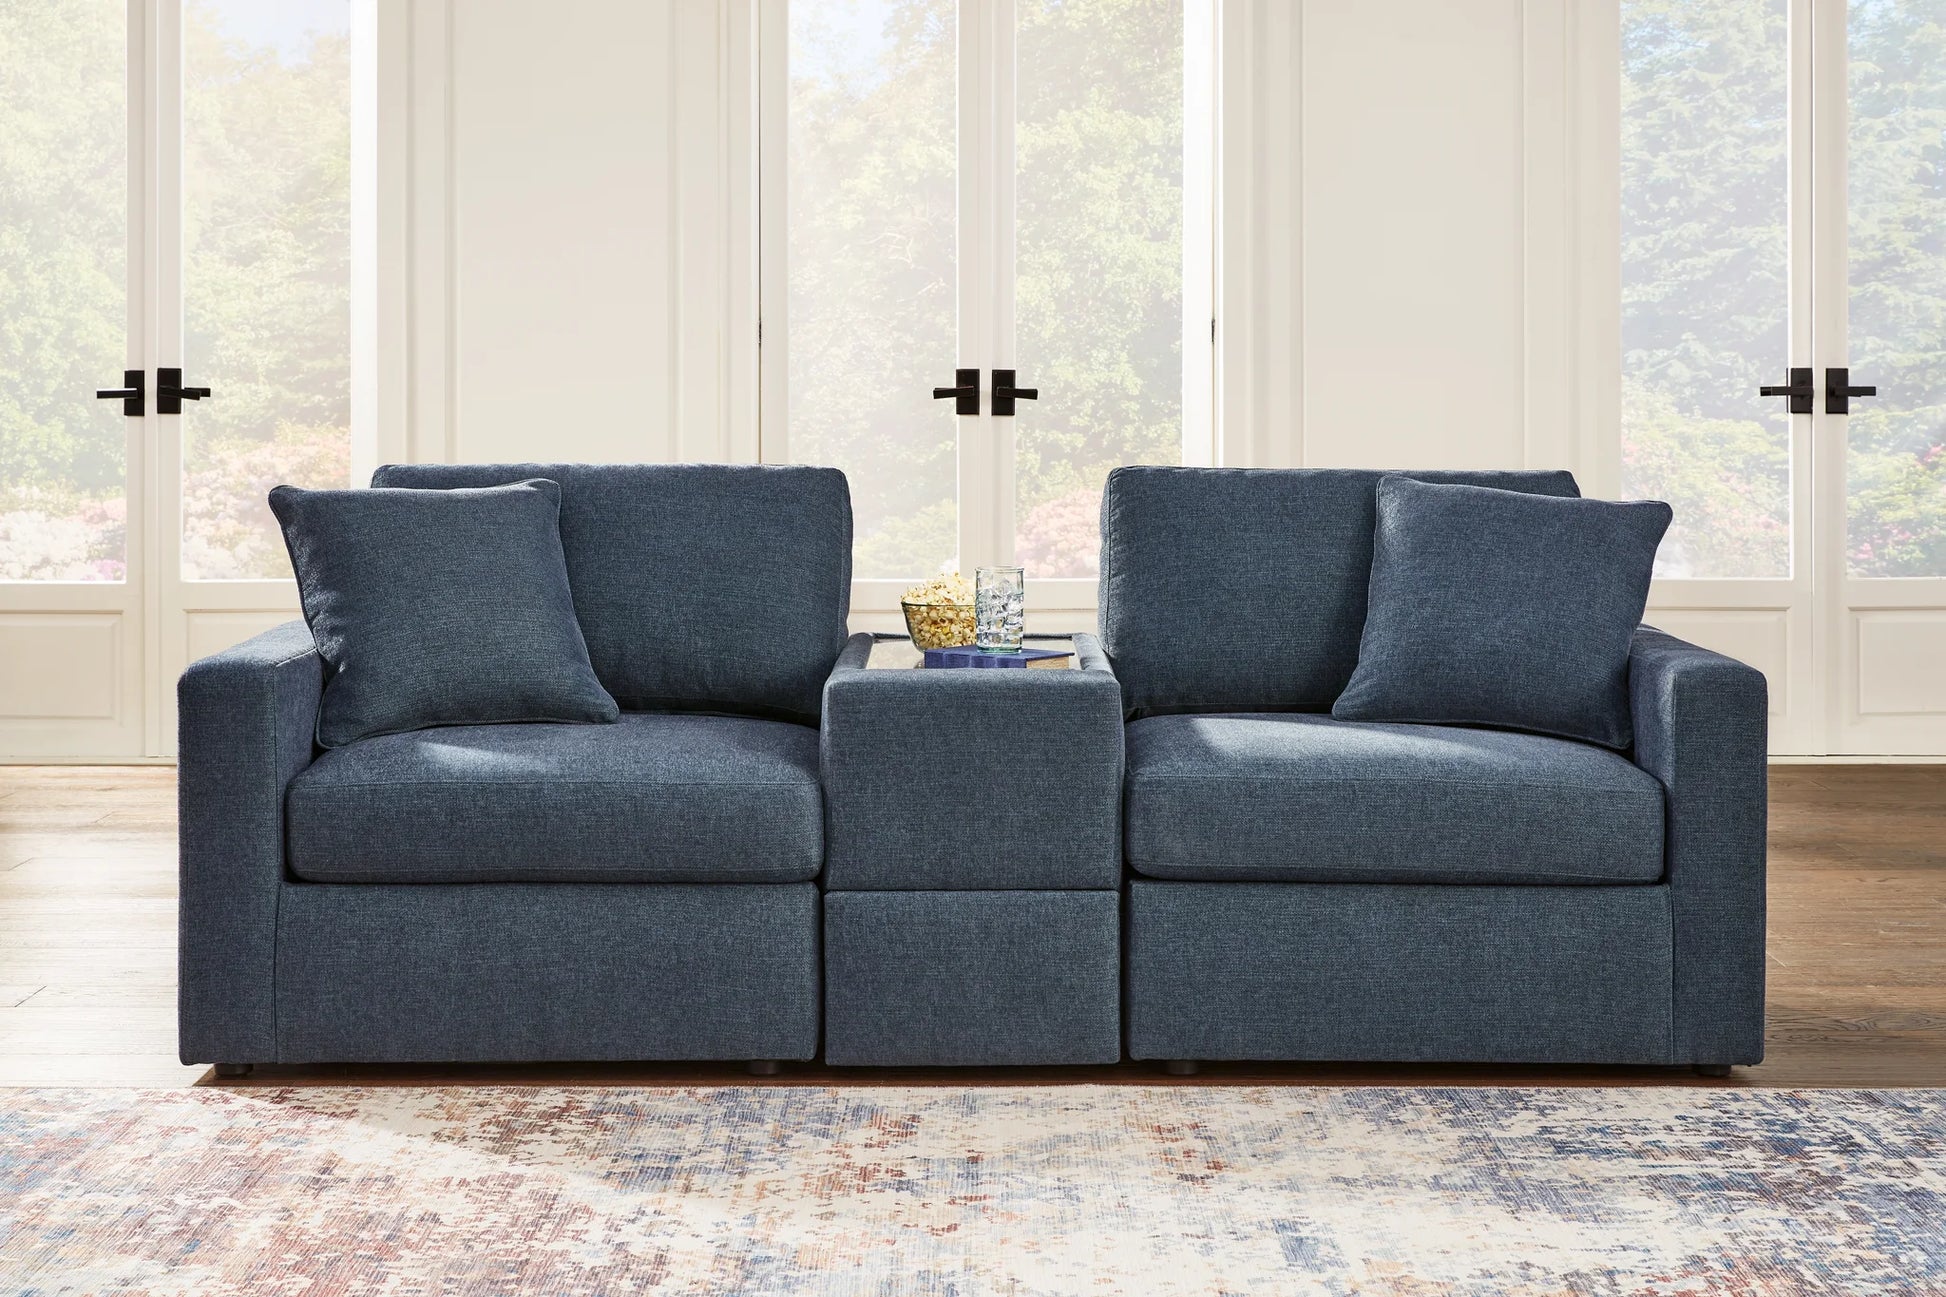 Modmax - Ink - 3-Piece Sectional Sofa With Storage Console 1